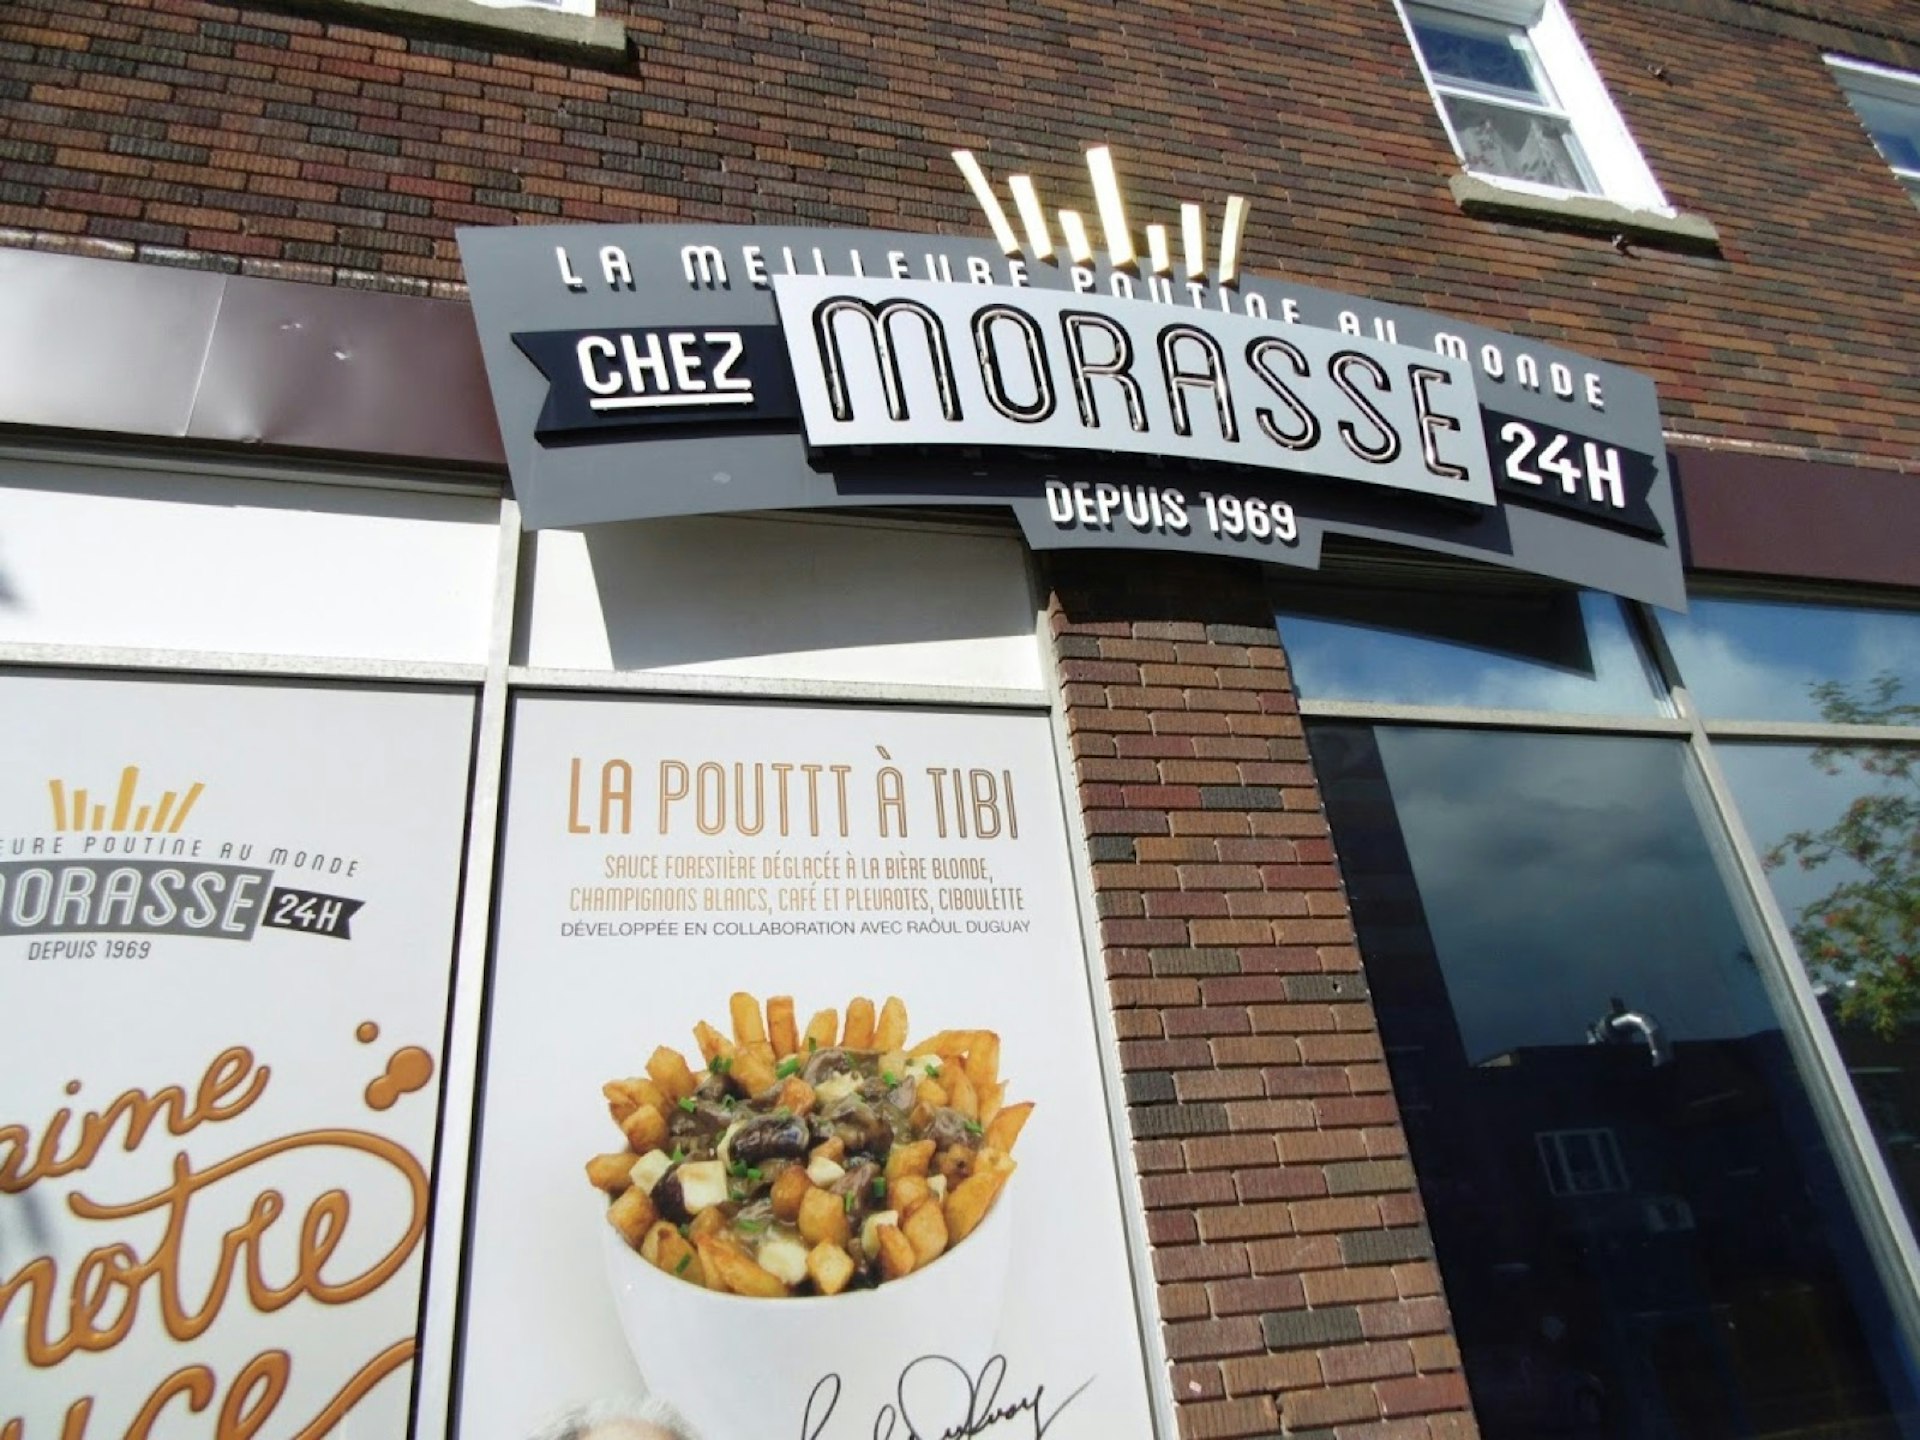 The exterior of the Chez Morasse eatery is shown, with a prominent advertisement for french fries and gravy in the window @ Fiona Tapp / Lonely Planet